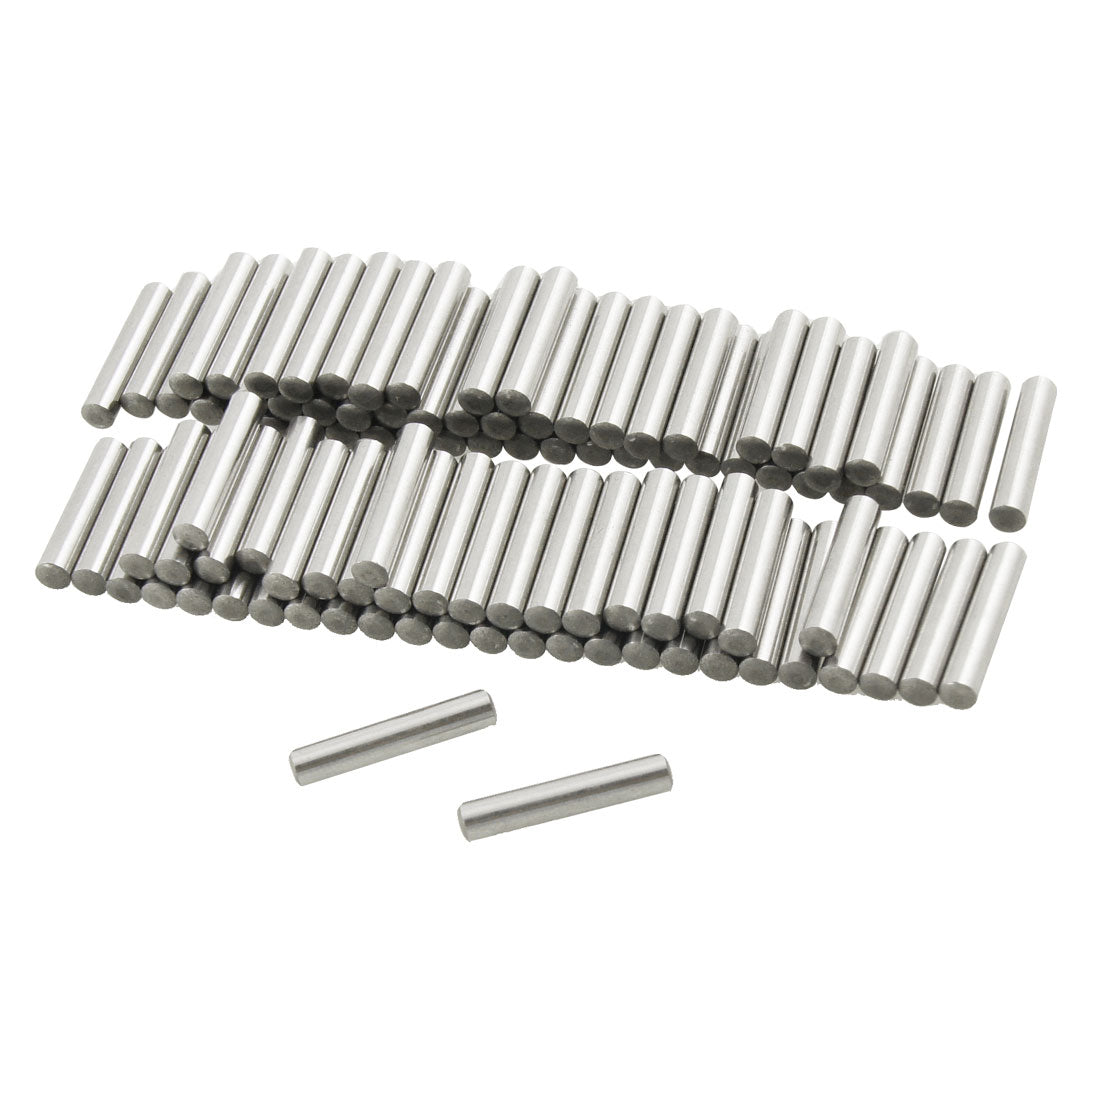 uxcell Uxcell 100 Pcs Stainless Steel 2.8mm x 15.8mm Dowel Pins Fasten Elements